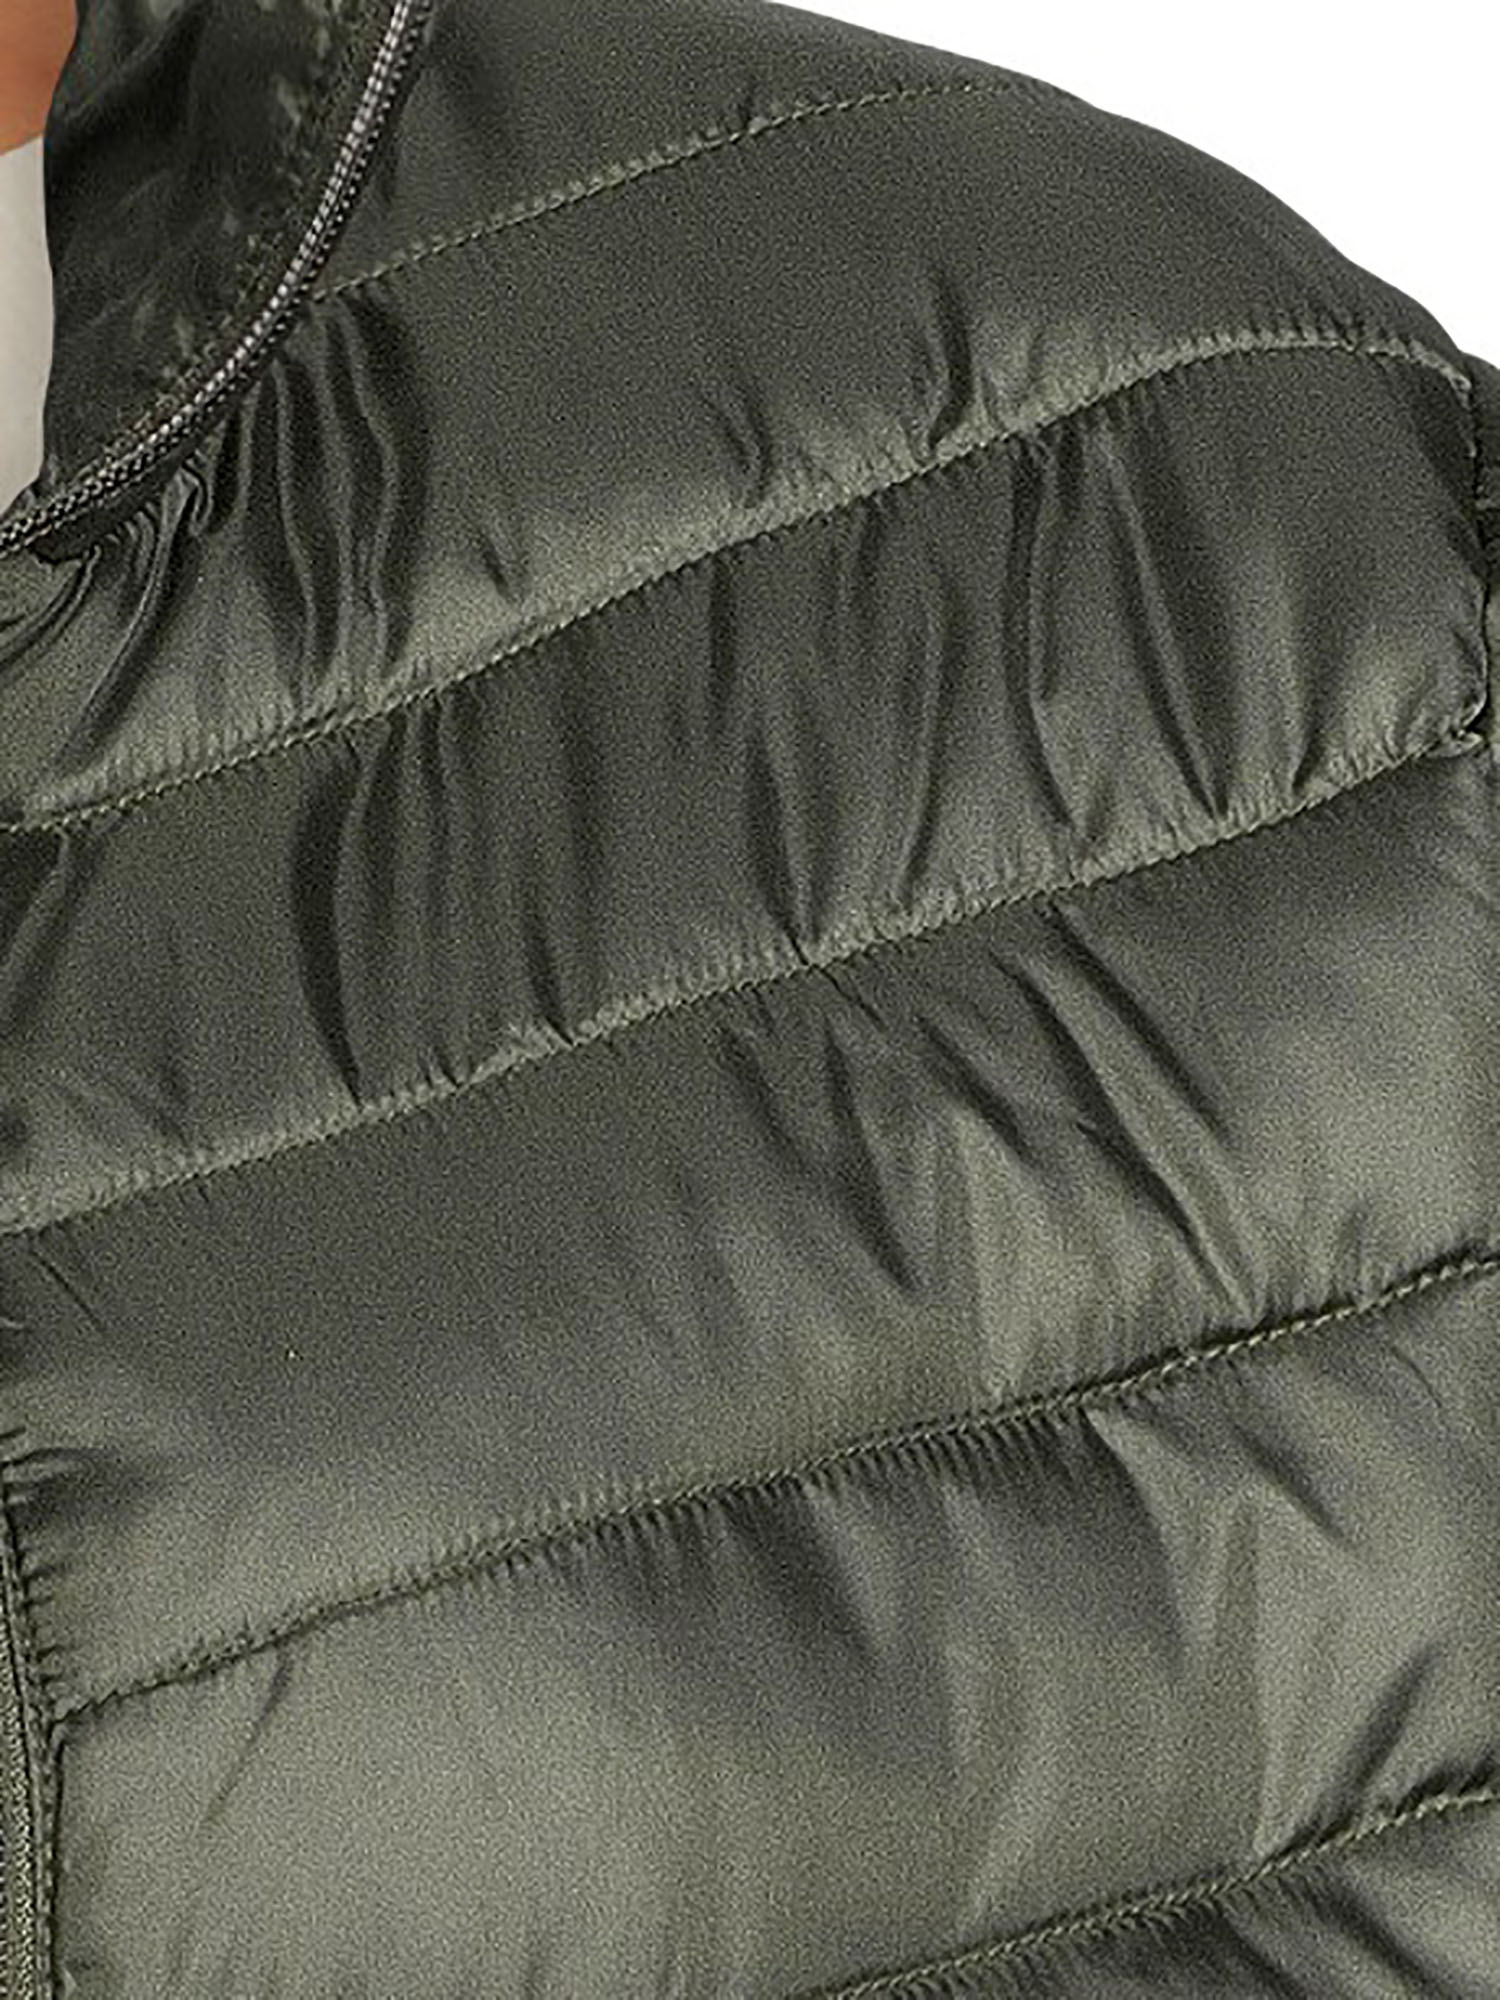 Big Chill Women's Plus Size Packable Puffer Jacket, Sizes 1X-3X ...